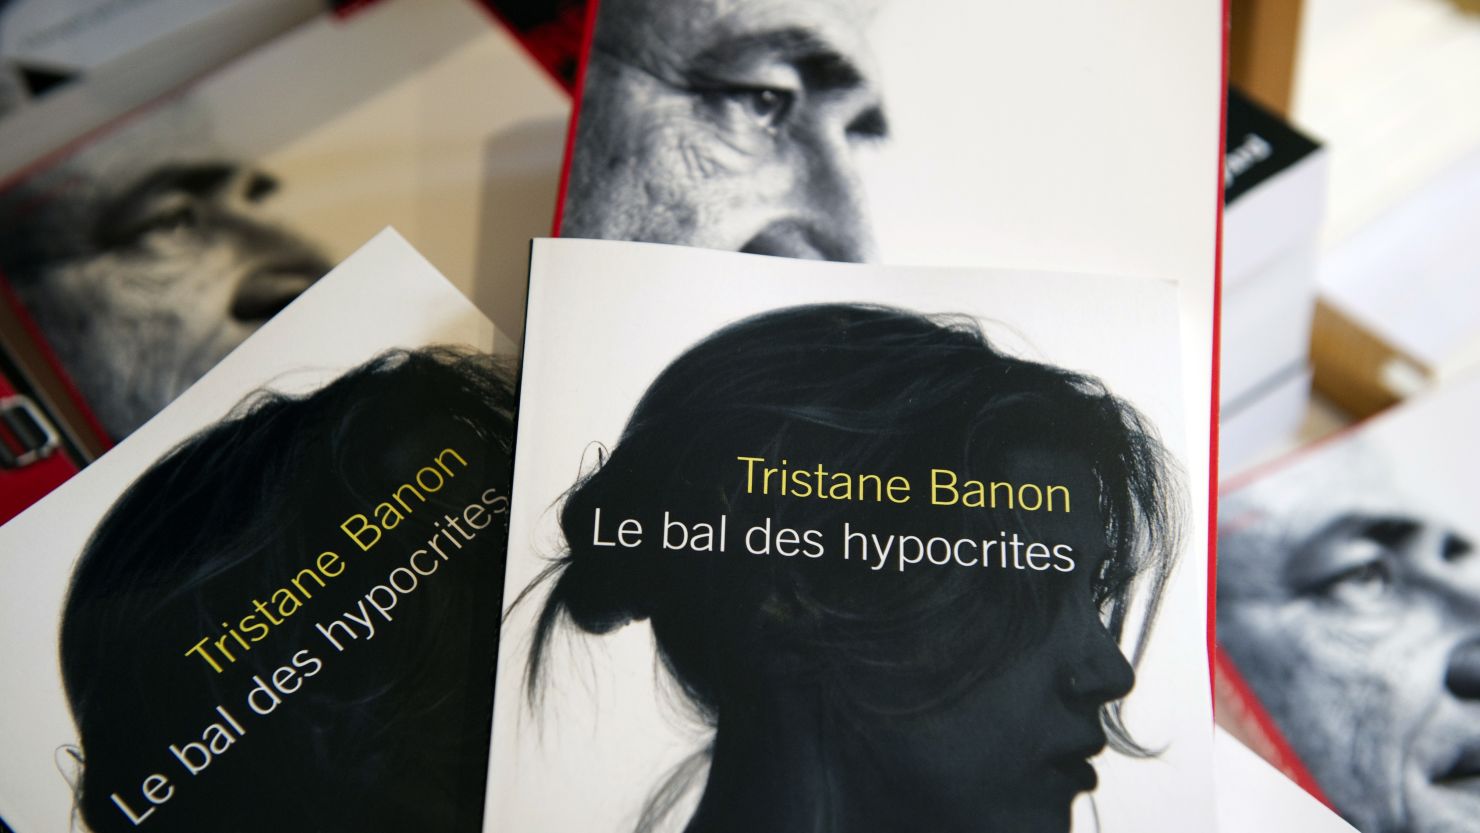 Tristane Banon's "Le Bal des Hypocrites" details how her life changed after Dominique Strauss-Kahn was arrested.